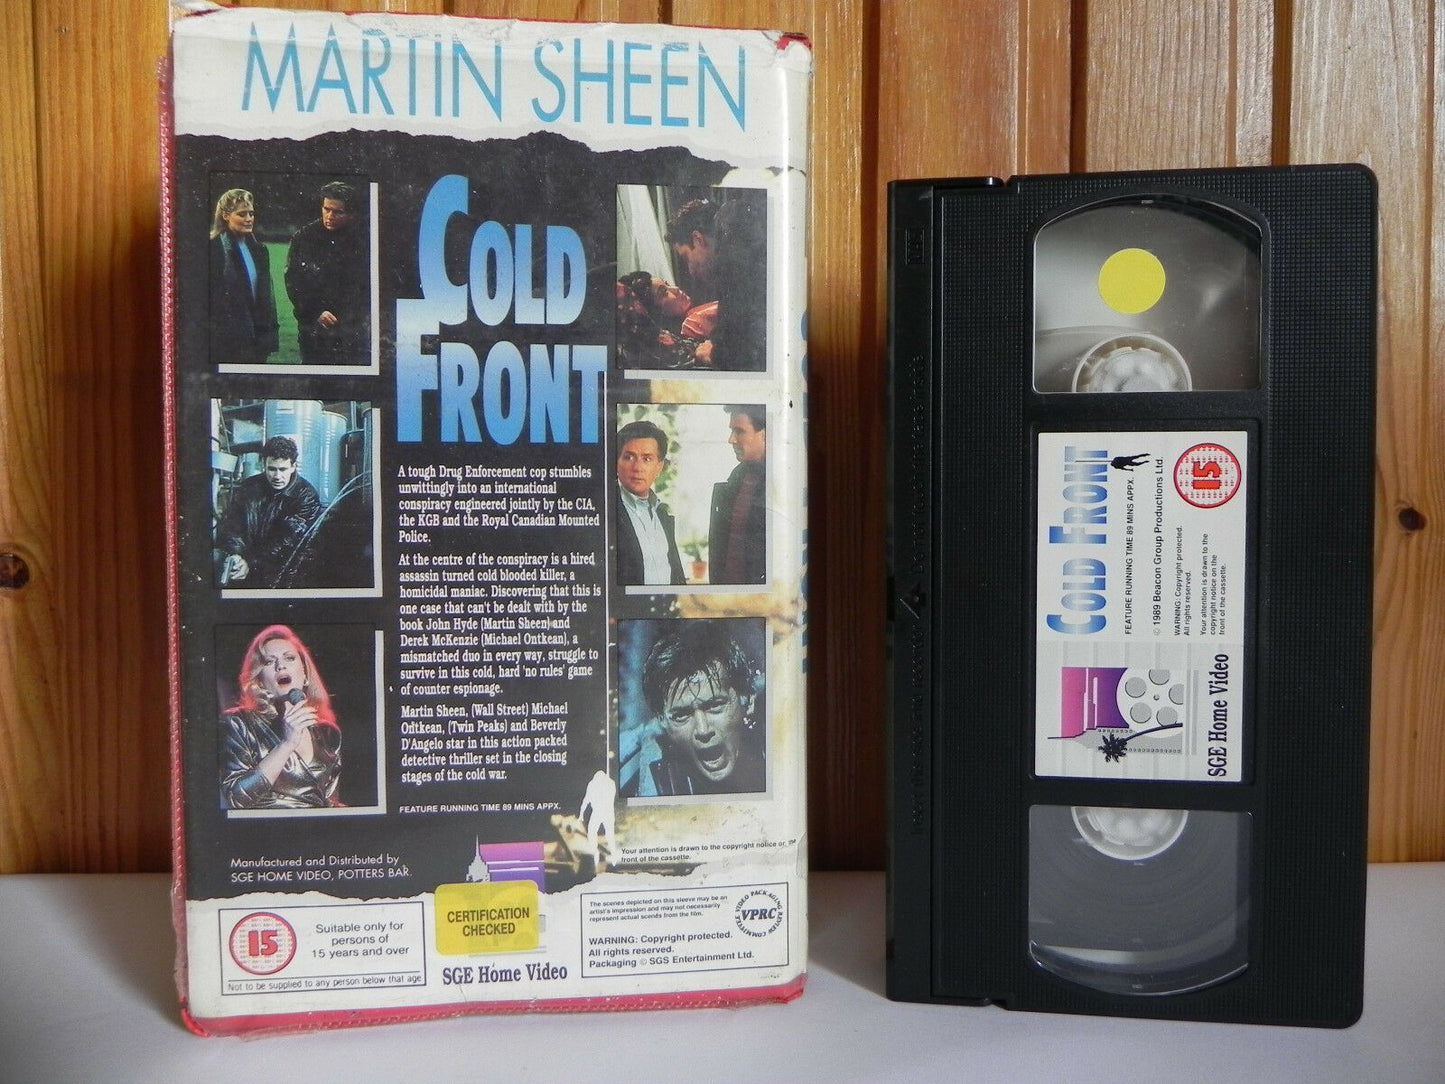 Cold Front - SGE Home Video - Drama - Action - Martin Sheen - Large Box - VHS-